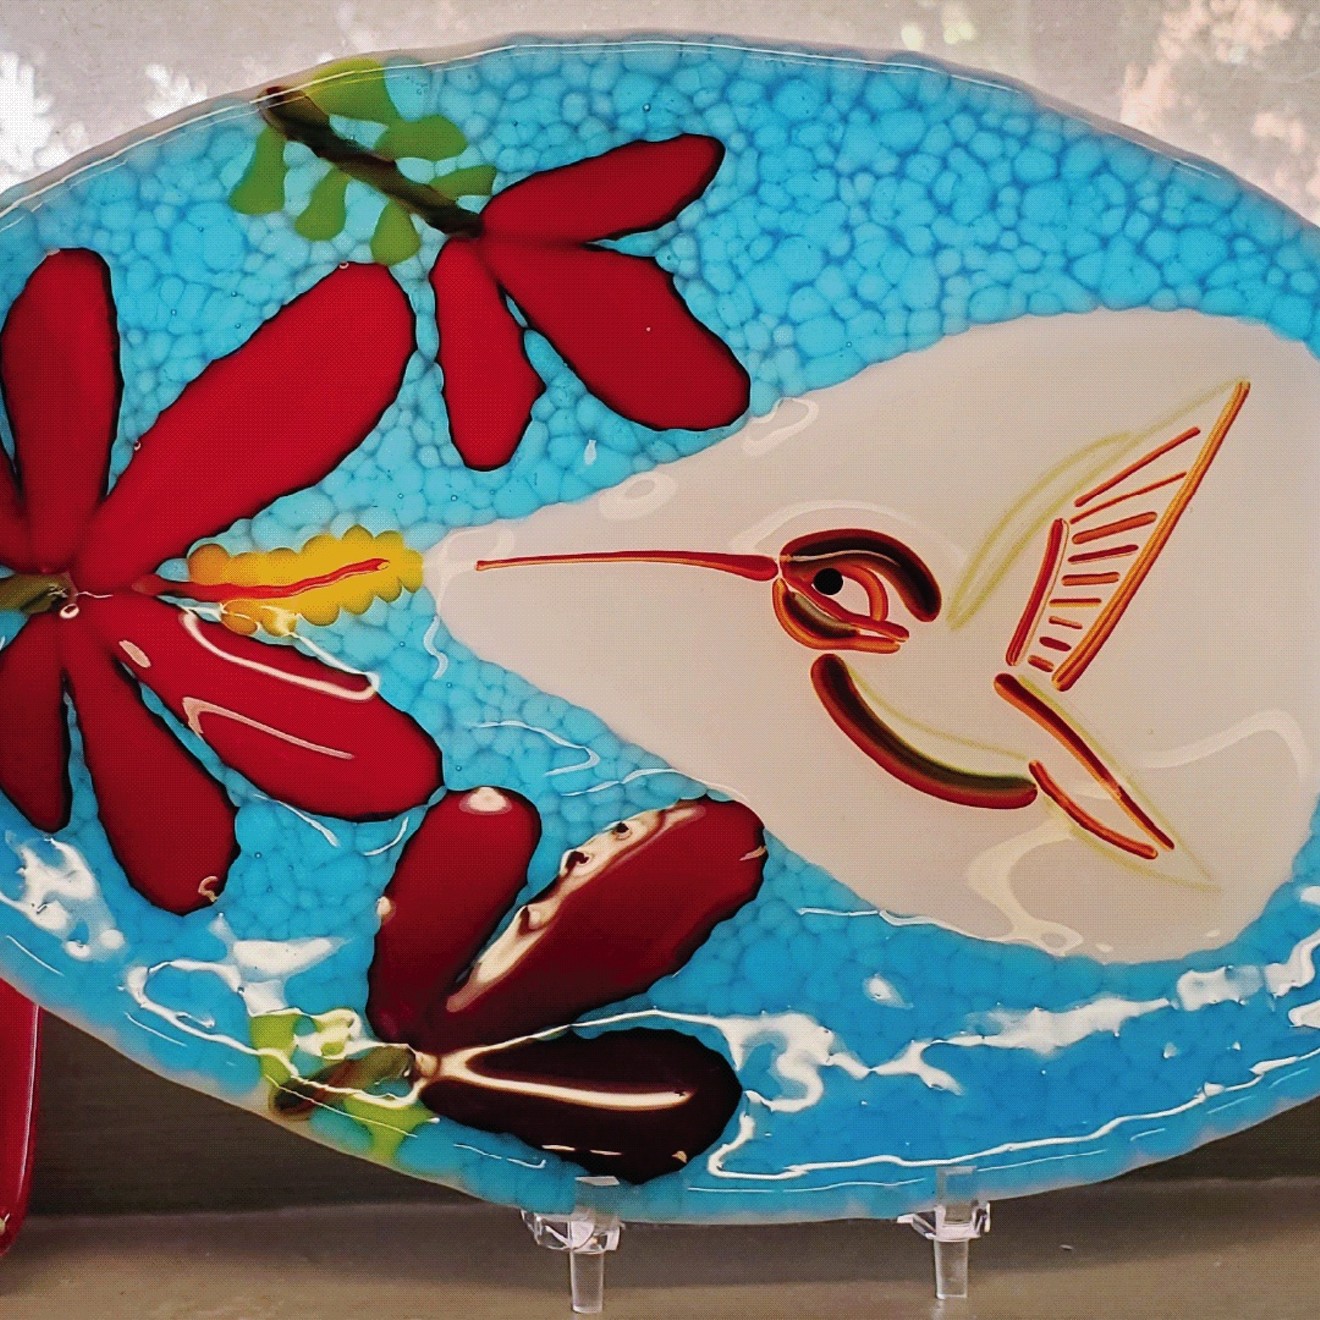 Try taking a fused glass class to get your creative juices flowing.